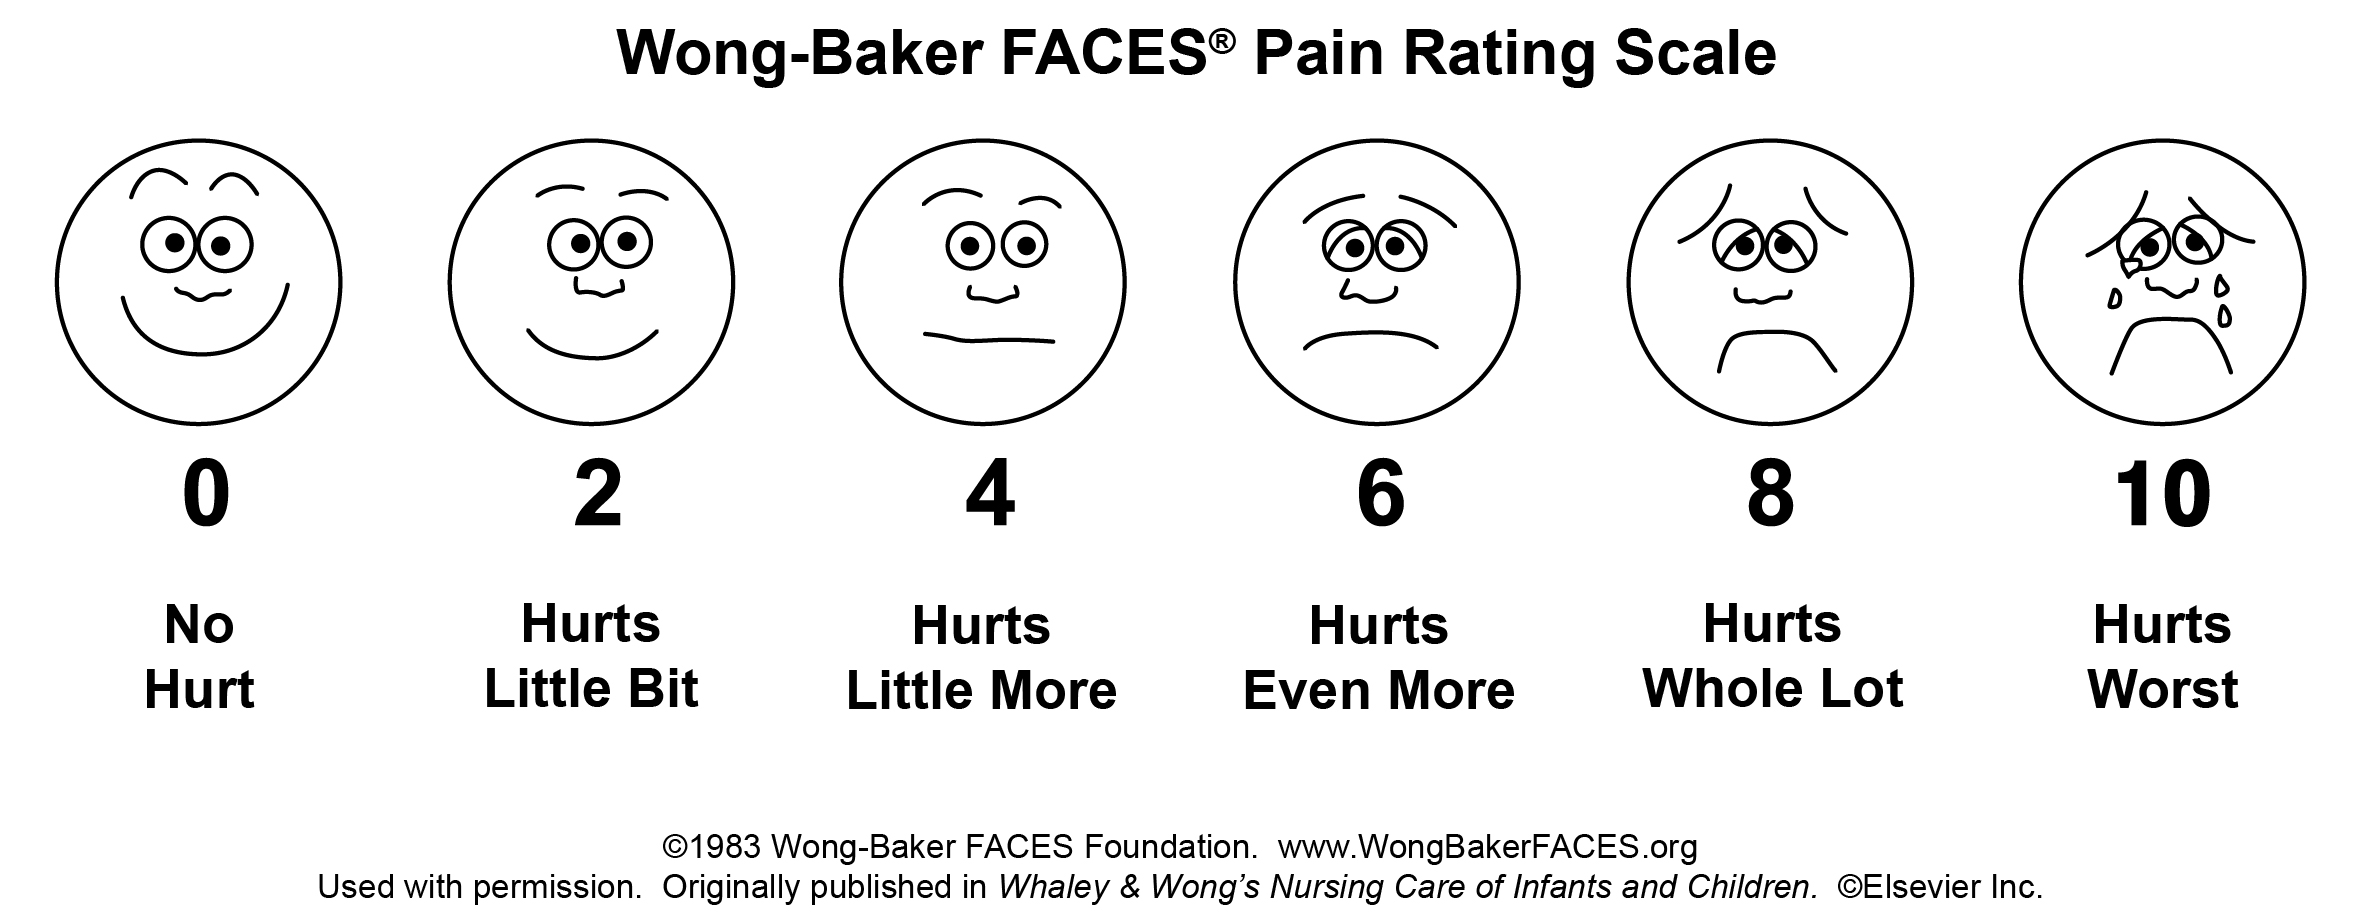 A pain scale from 0 to 10 that uses a combination of cartoon faces and words to convey the severity of the pain.